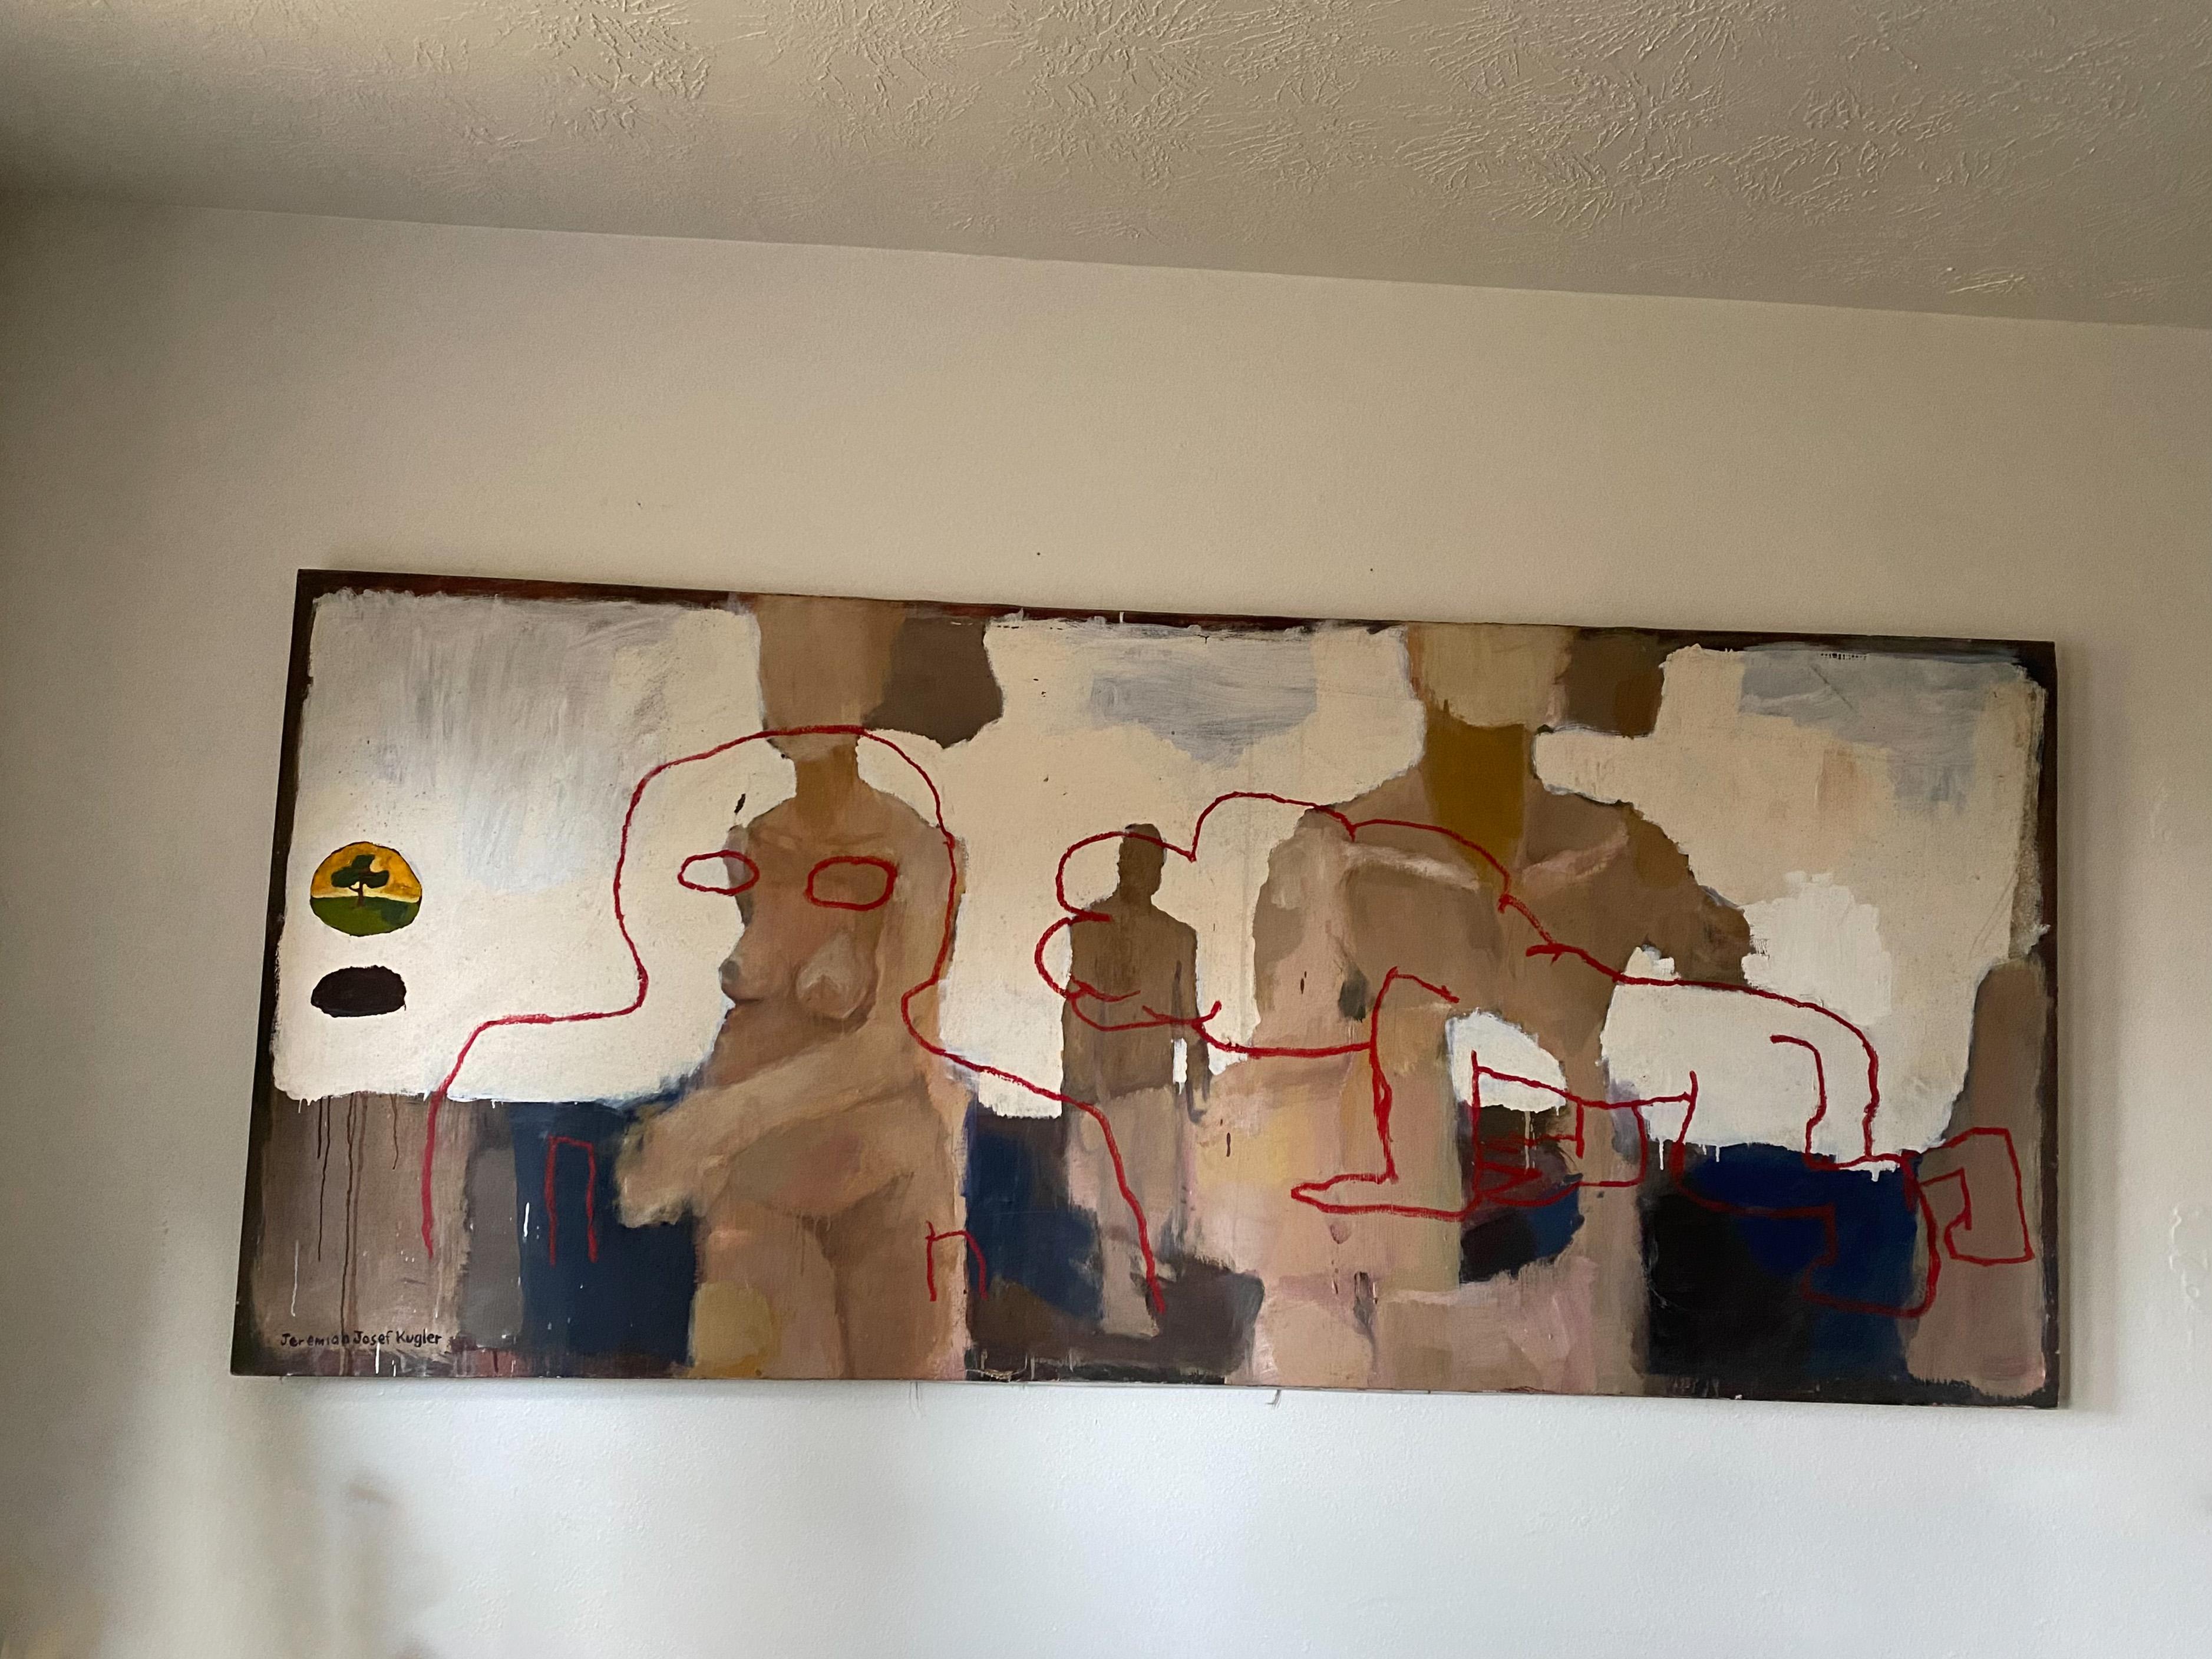 This Primitive abstract painting by Jeremiah Josef Kuglar is made on a large 7'x3' canvas. The painting features large, textured brush stroke  muted palette and large, textured brush stroke with pops of blue and red accents and silhouettes. It is